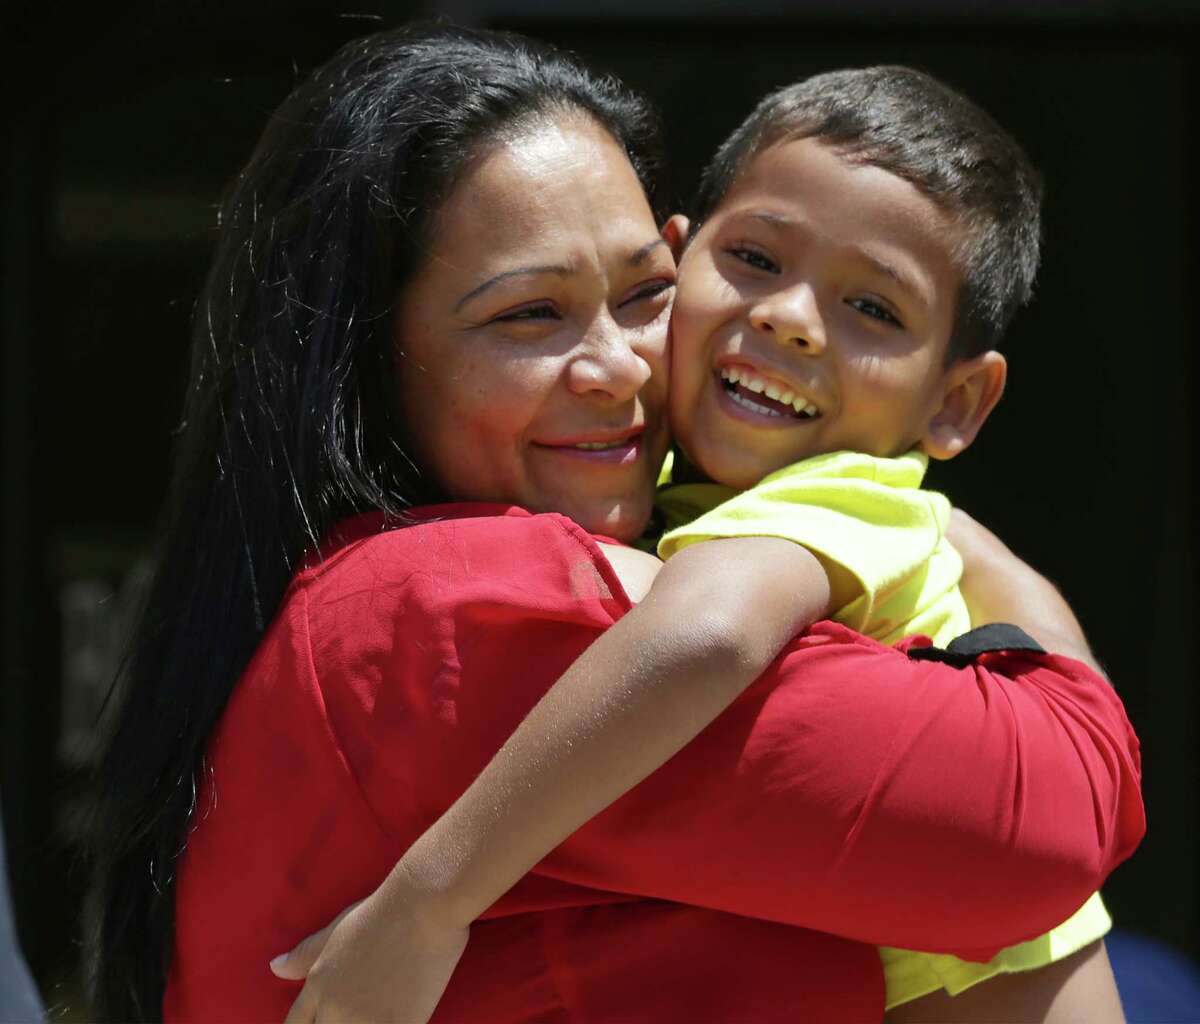 Wendy Rodriguez Vargas, 38, of Honduras, who was recently released from a south Texas detention center in Dilley, is reunited with her 5 year old son Keverson who was placed in foster care through BCFS after being picked up with his father after crossing into the U.S. at Eagle Pass. Wendy and her 2 year-old daughter Alexia, who were picked up separately from the men, have been staying at the Mennonite House, waiting to be reunited with Keverson. Her husband Juan Carlos Irias Archaga, is still in a detention center in Del Rio.